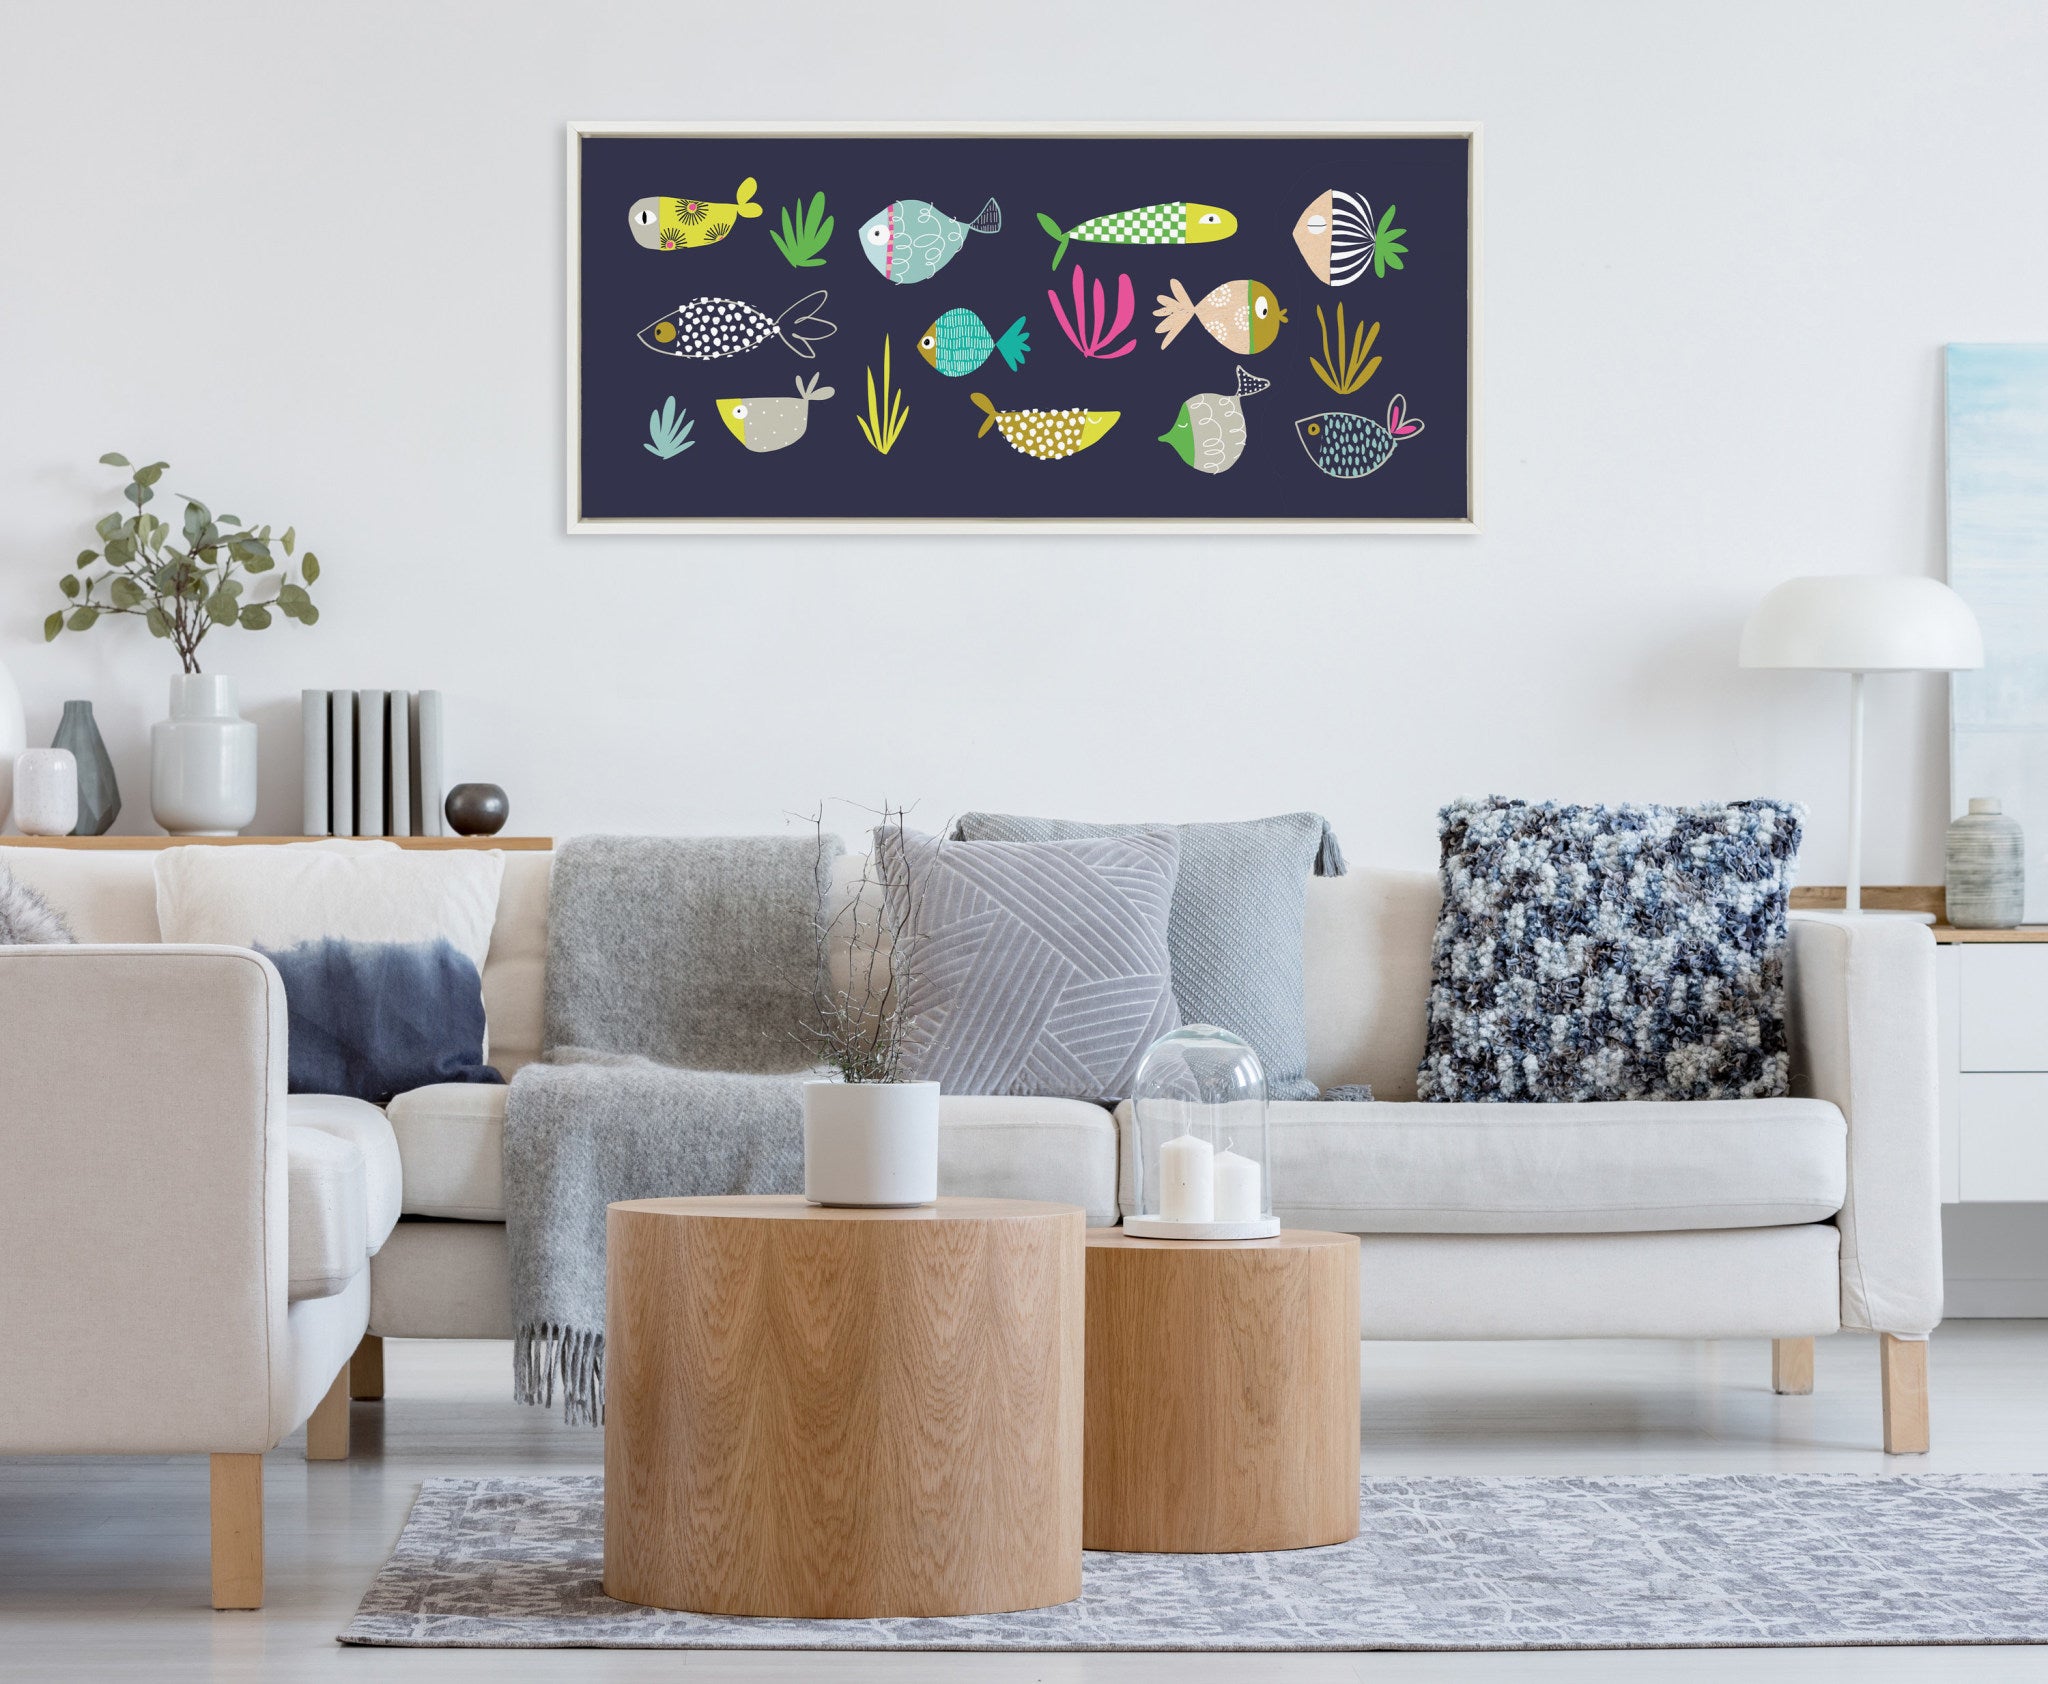 Sylvie Playtime Story Fishy Friends Framed Canvas by Turnowsky